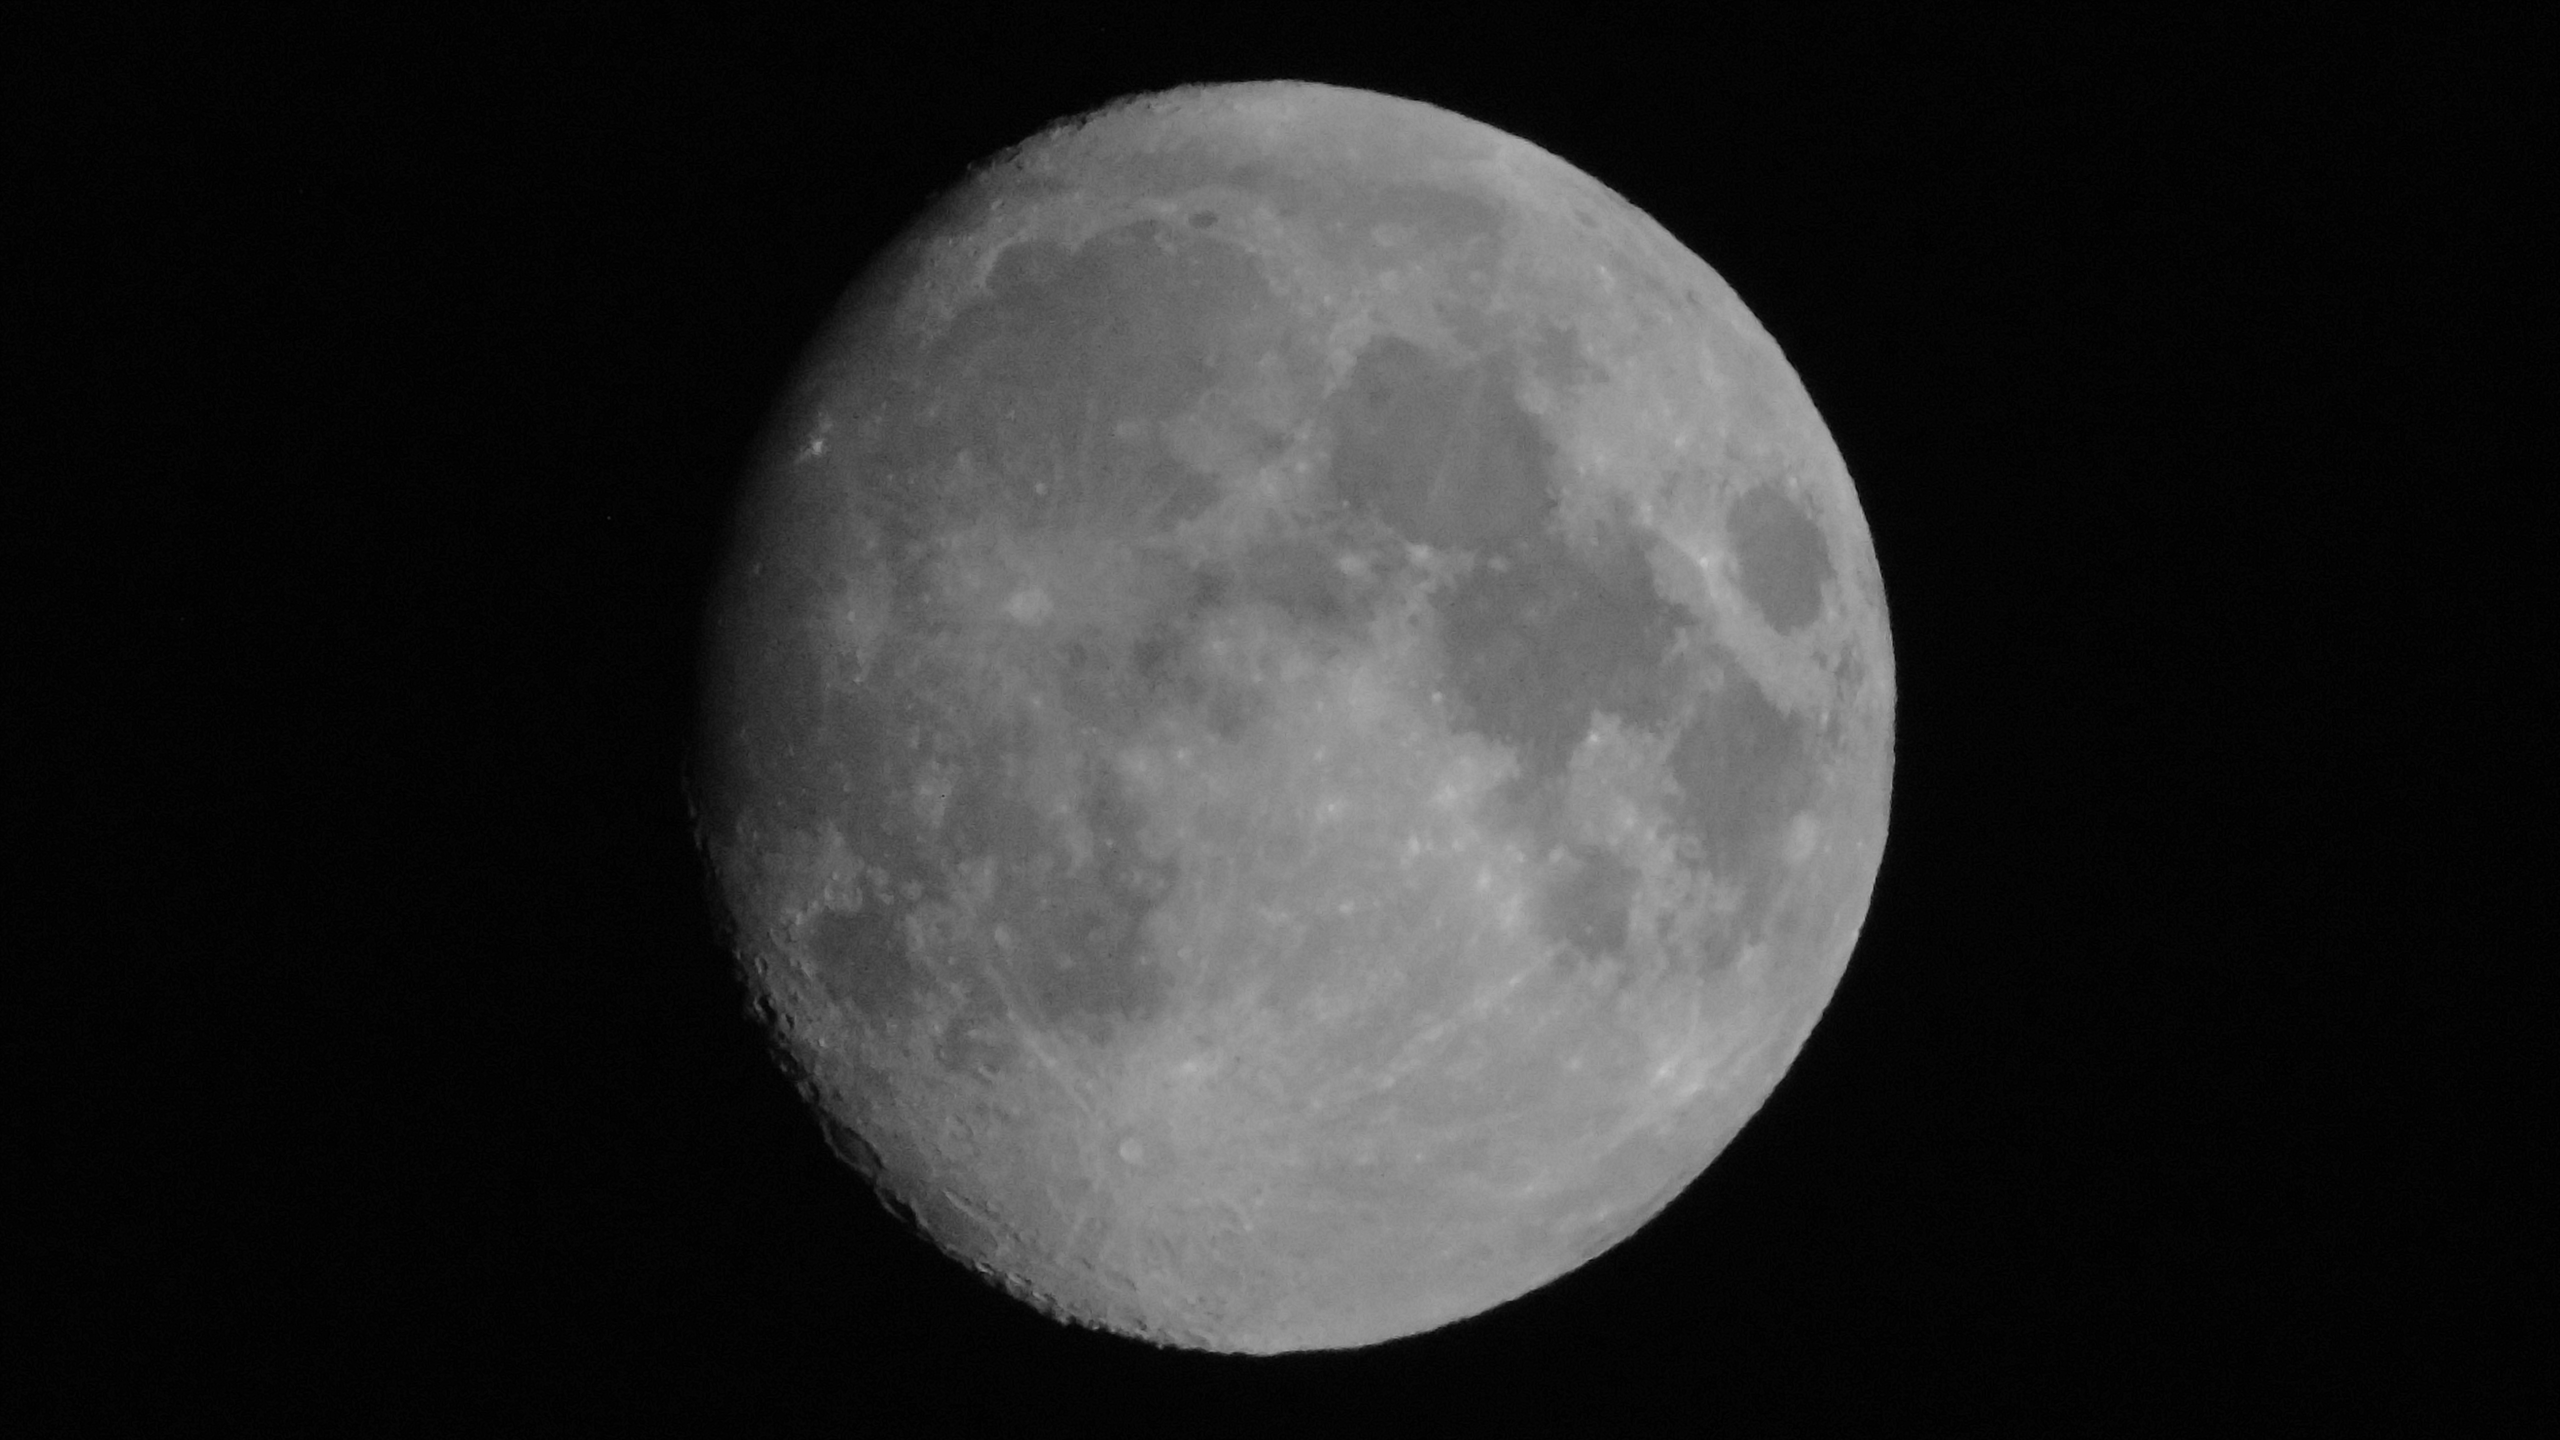 File:Nearly Full Moon.png - Wikimedia Commons